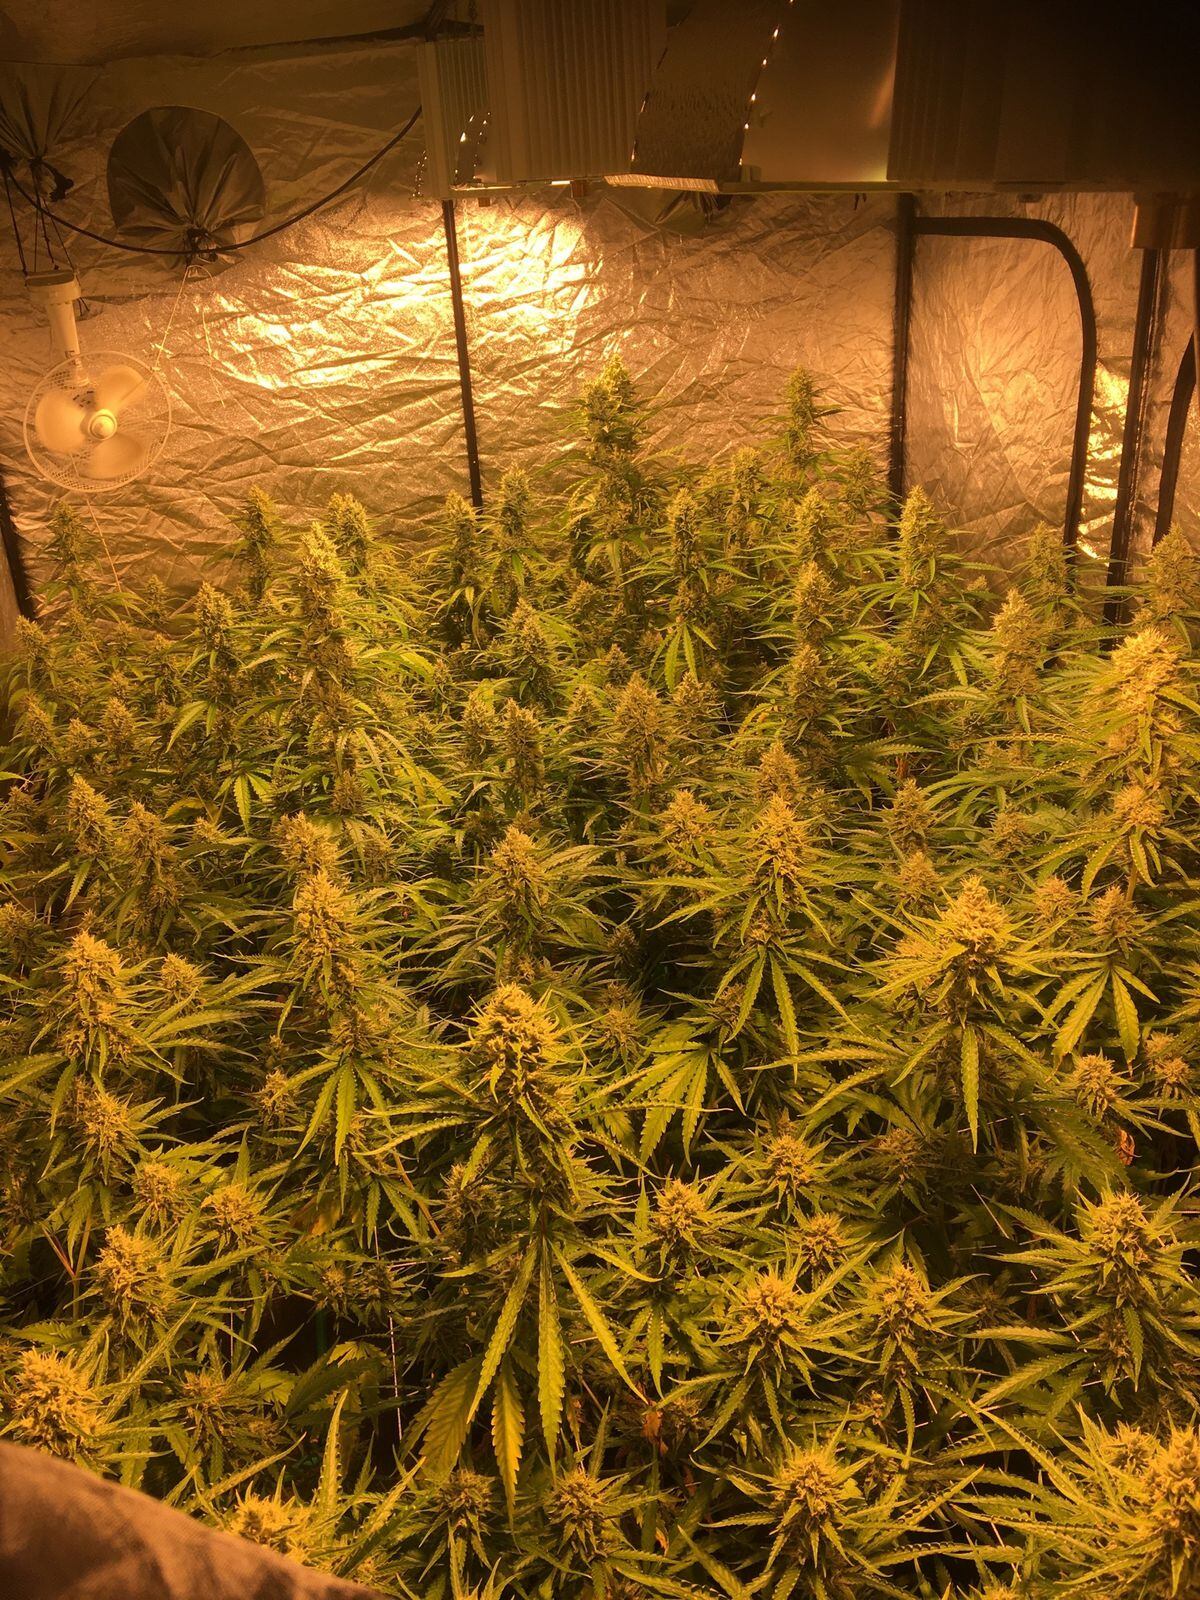 Some of the cannabis plants found in Wolverhampton